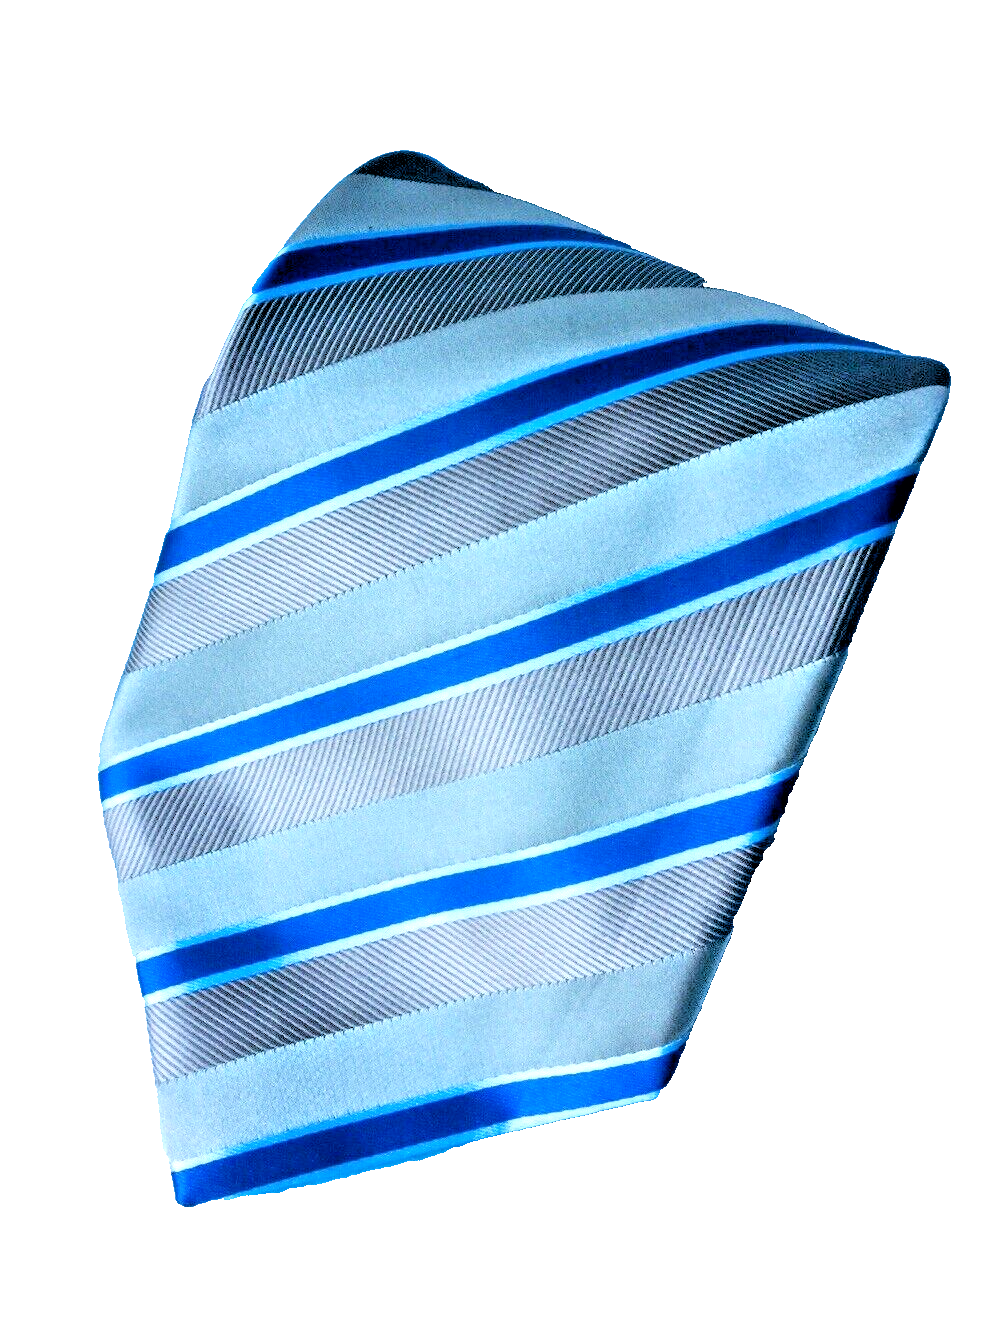 Primary image for Marks and Spencer Mens Tie Gold Blue Striped Pattern Polyester Necktie vtd